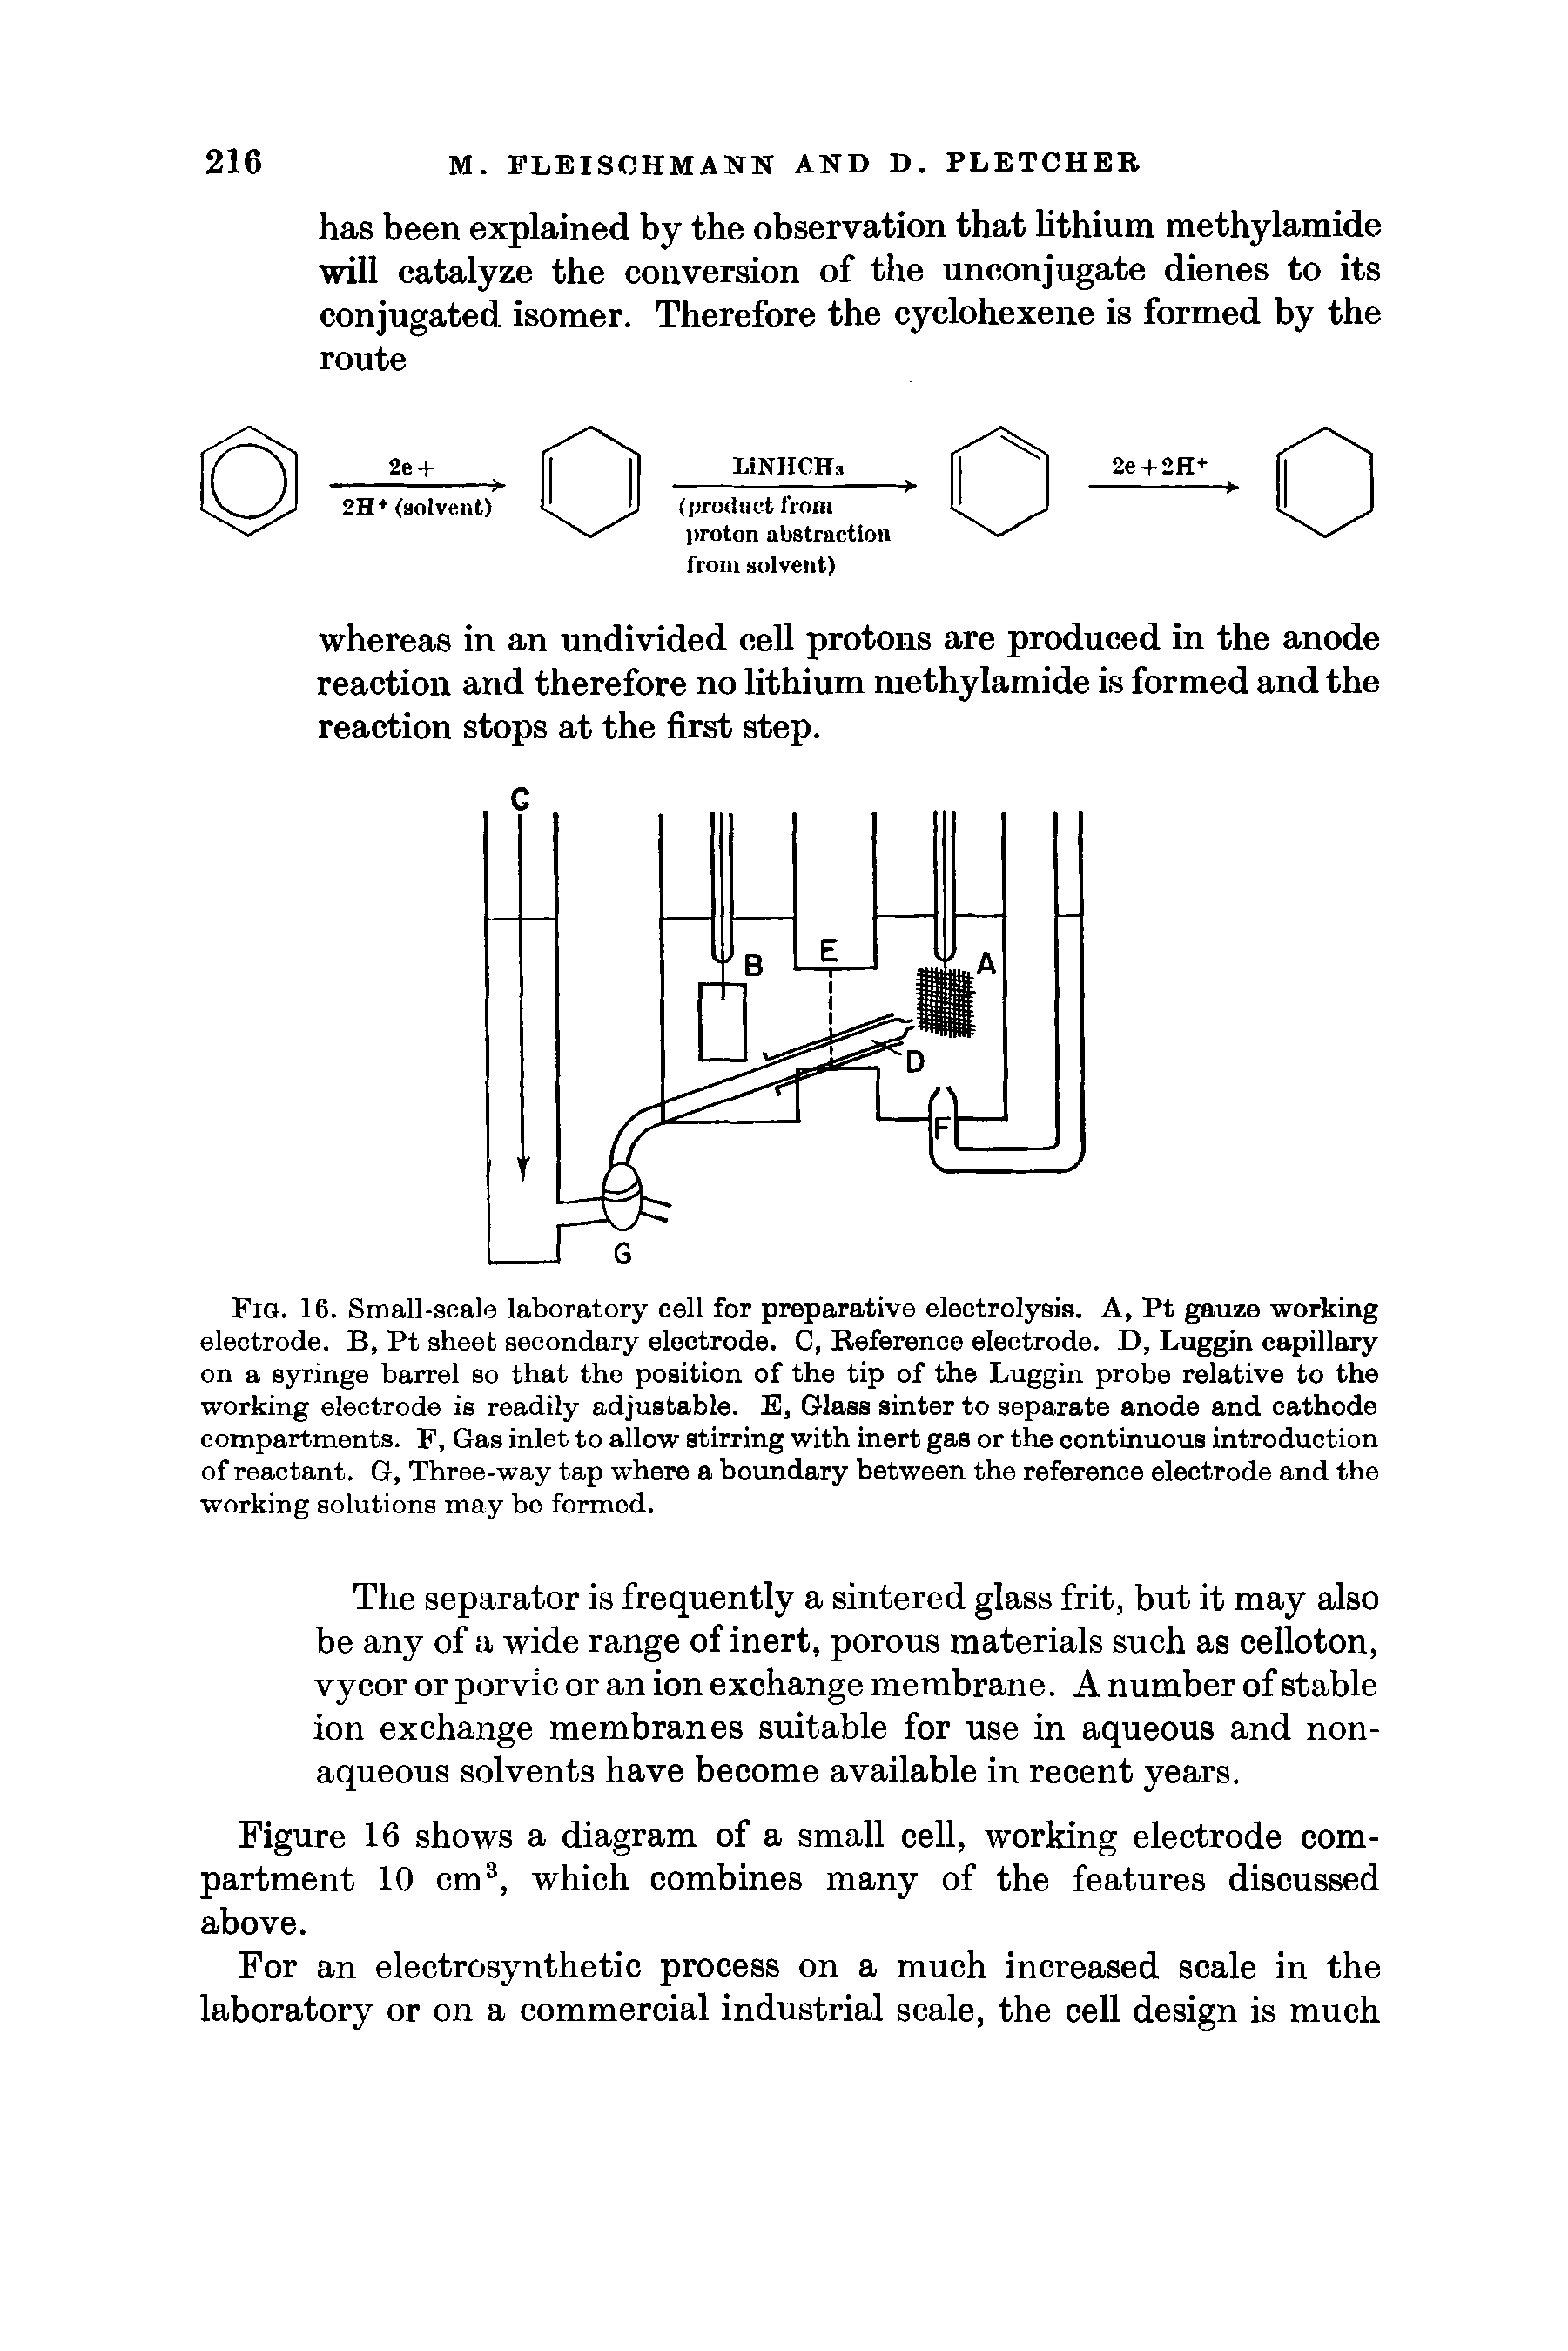 Fig. 16. Small-scalo laboratory cell for preparative electrolysis. A, Pt gauze working electrode. B, Pt sheet secondary electrode. C, Reference electrode. D, Luggin capillary on a syringe barrel so that the position of the tip of the Luggin probe relative to the working electrode is readily adjustable. E, Glass sinter to separate anode and cathode compartments. F, Gas inlet to allow stirring with inert gas or the continuous introduction of reactant. G, Three-way tap where a boundary between the reference electrode and the working solutions may be formed.